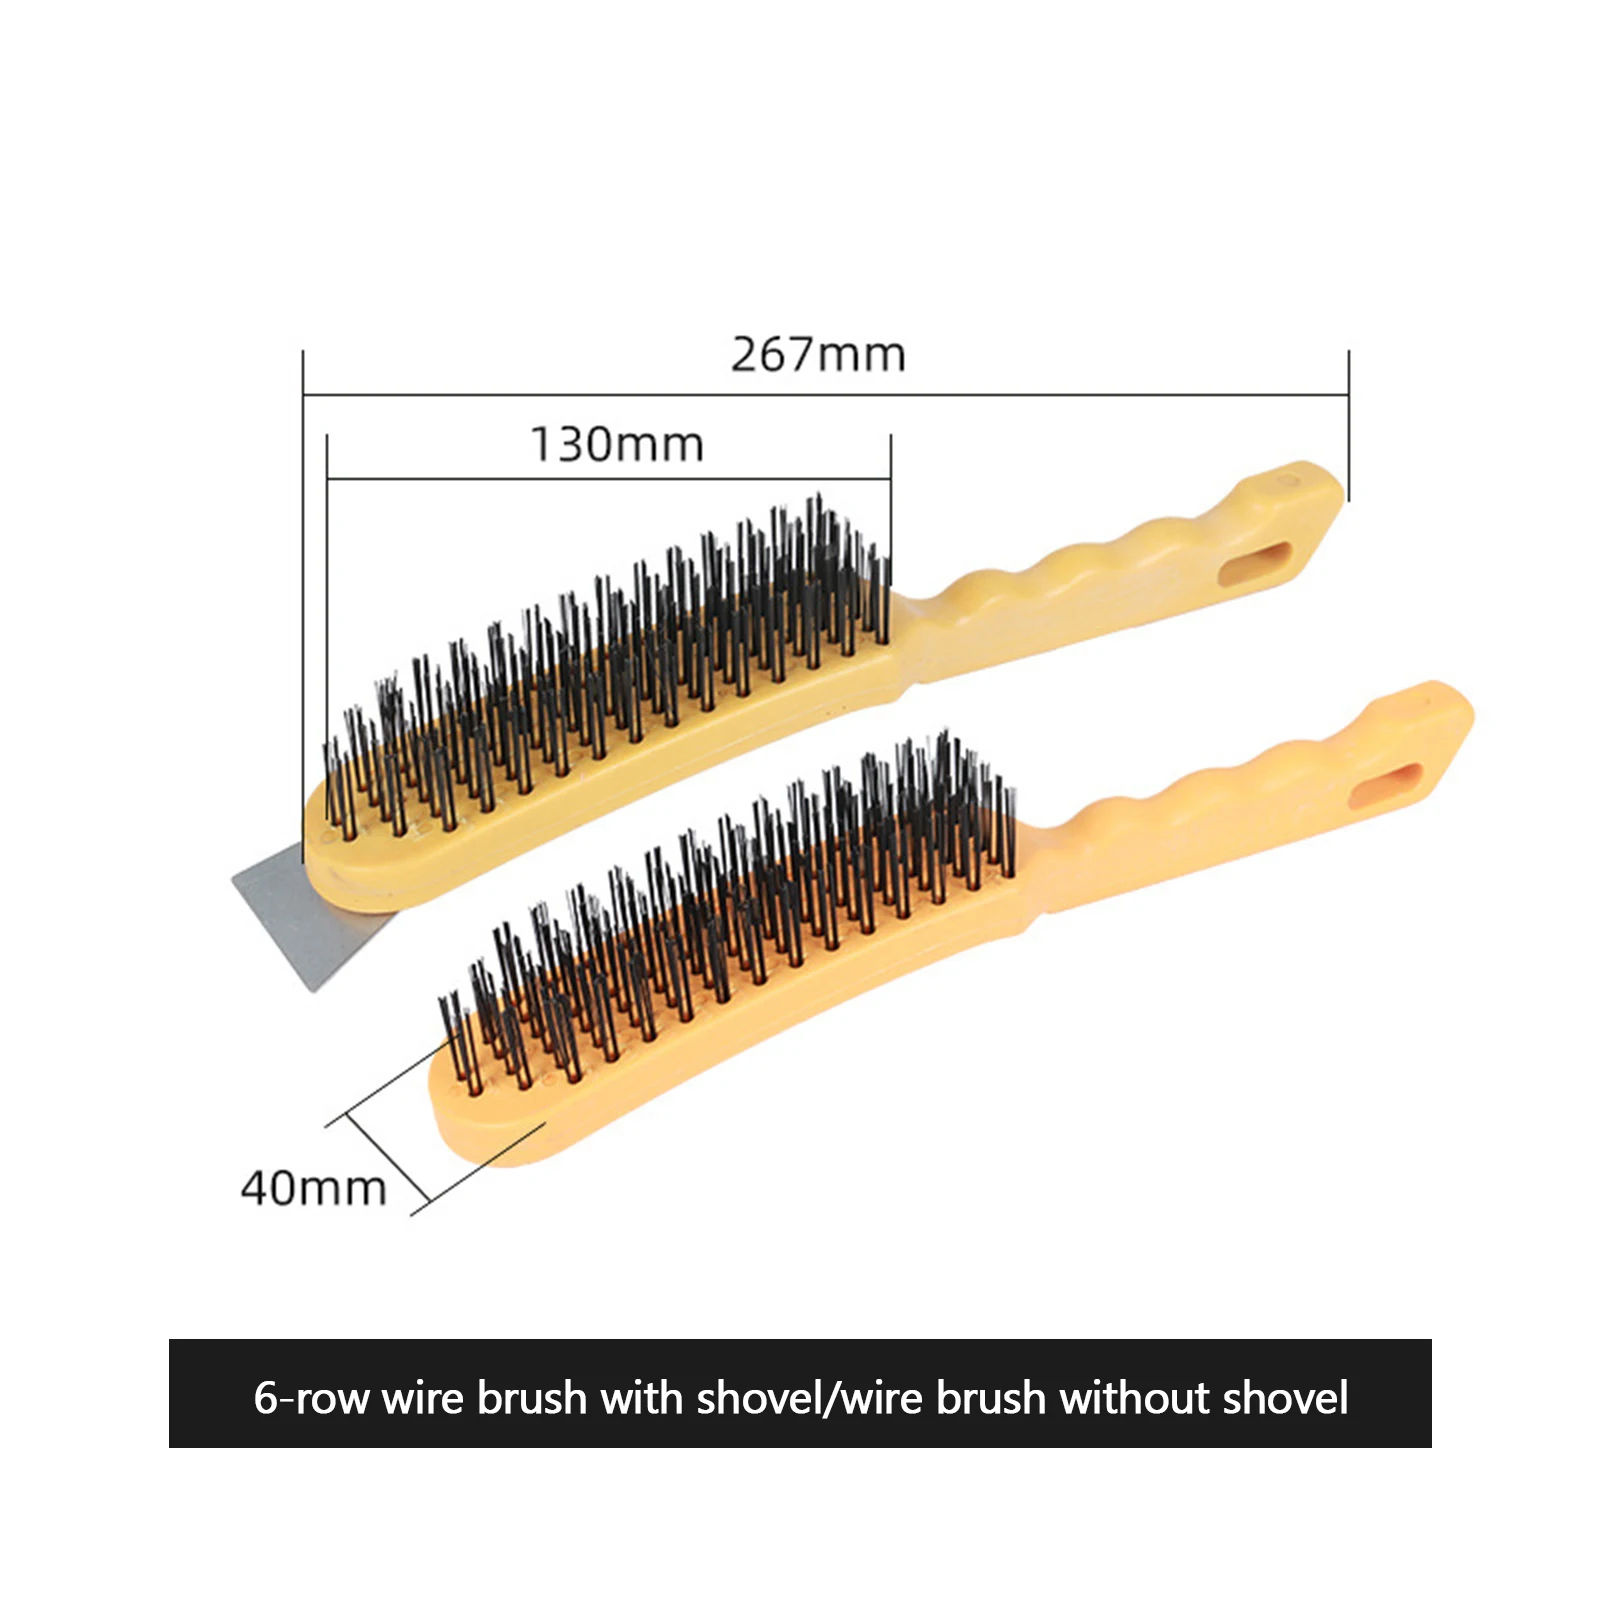 https://ae01.alicdn.com/kf/H4c6e019dbda241c4a3089d75cc8595a2G/Steel-Wire-Brush-Barbecue-Cleaning-Stainless-Steel-Wire-Iron-Brush-Small-Steel-Copper-Brush-Derusting-Brushsteel.jpeg